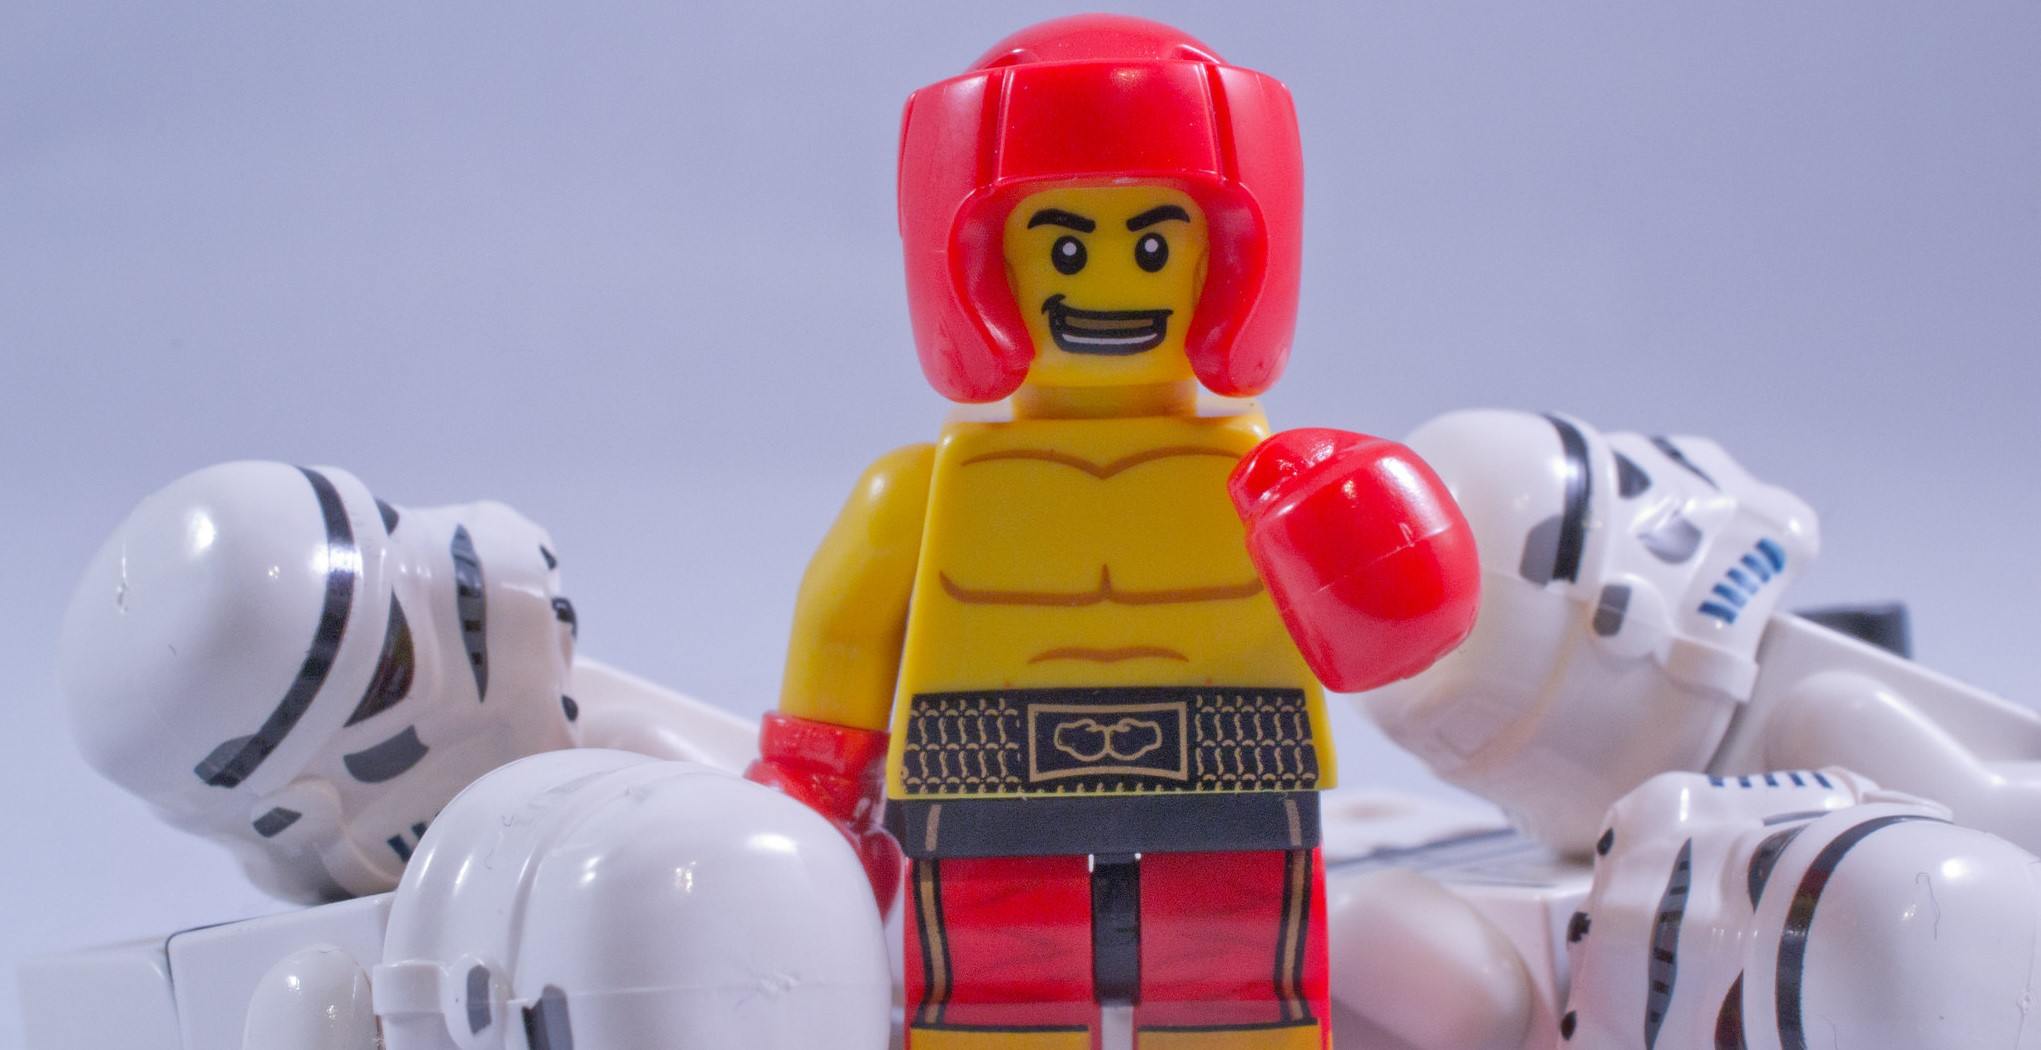 lego boxer - The Skinny Guy's Guide to Bulking Up (Fast)